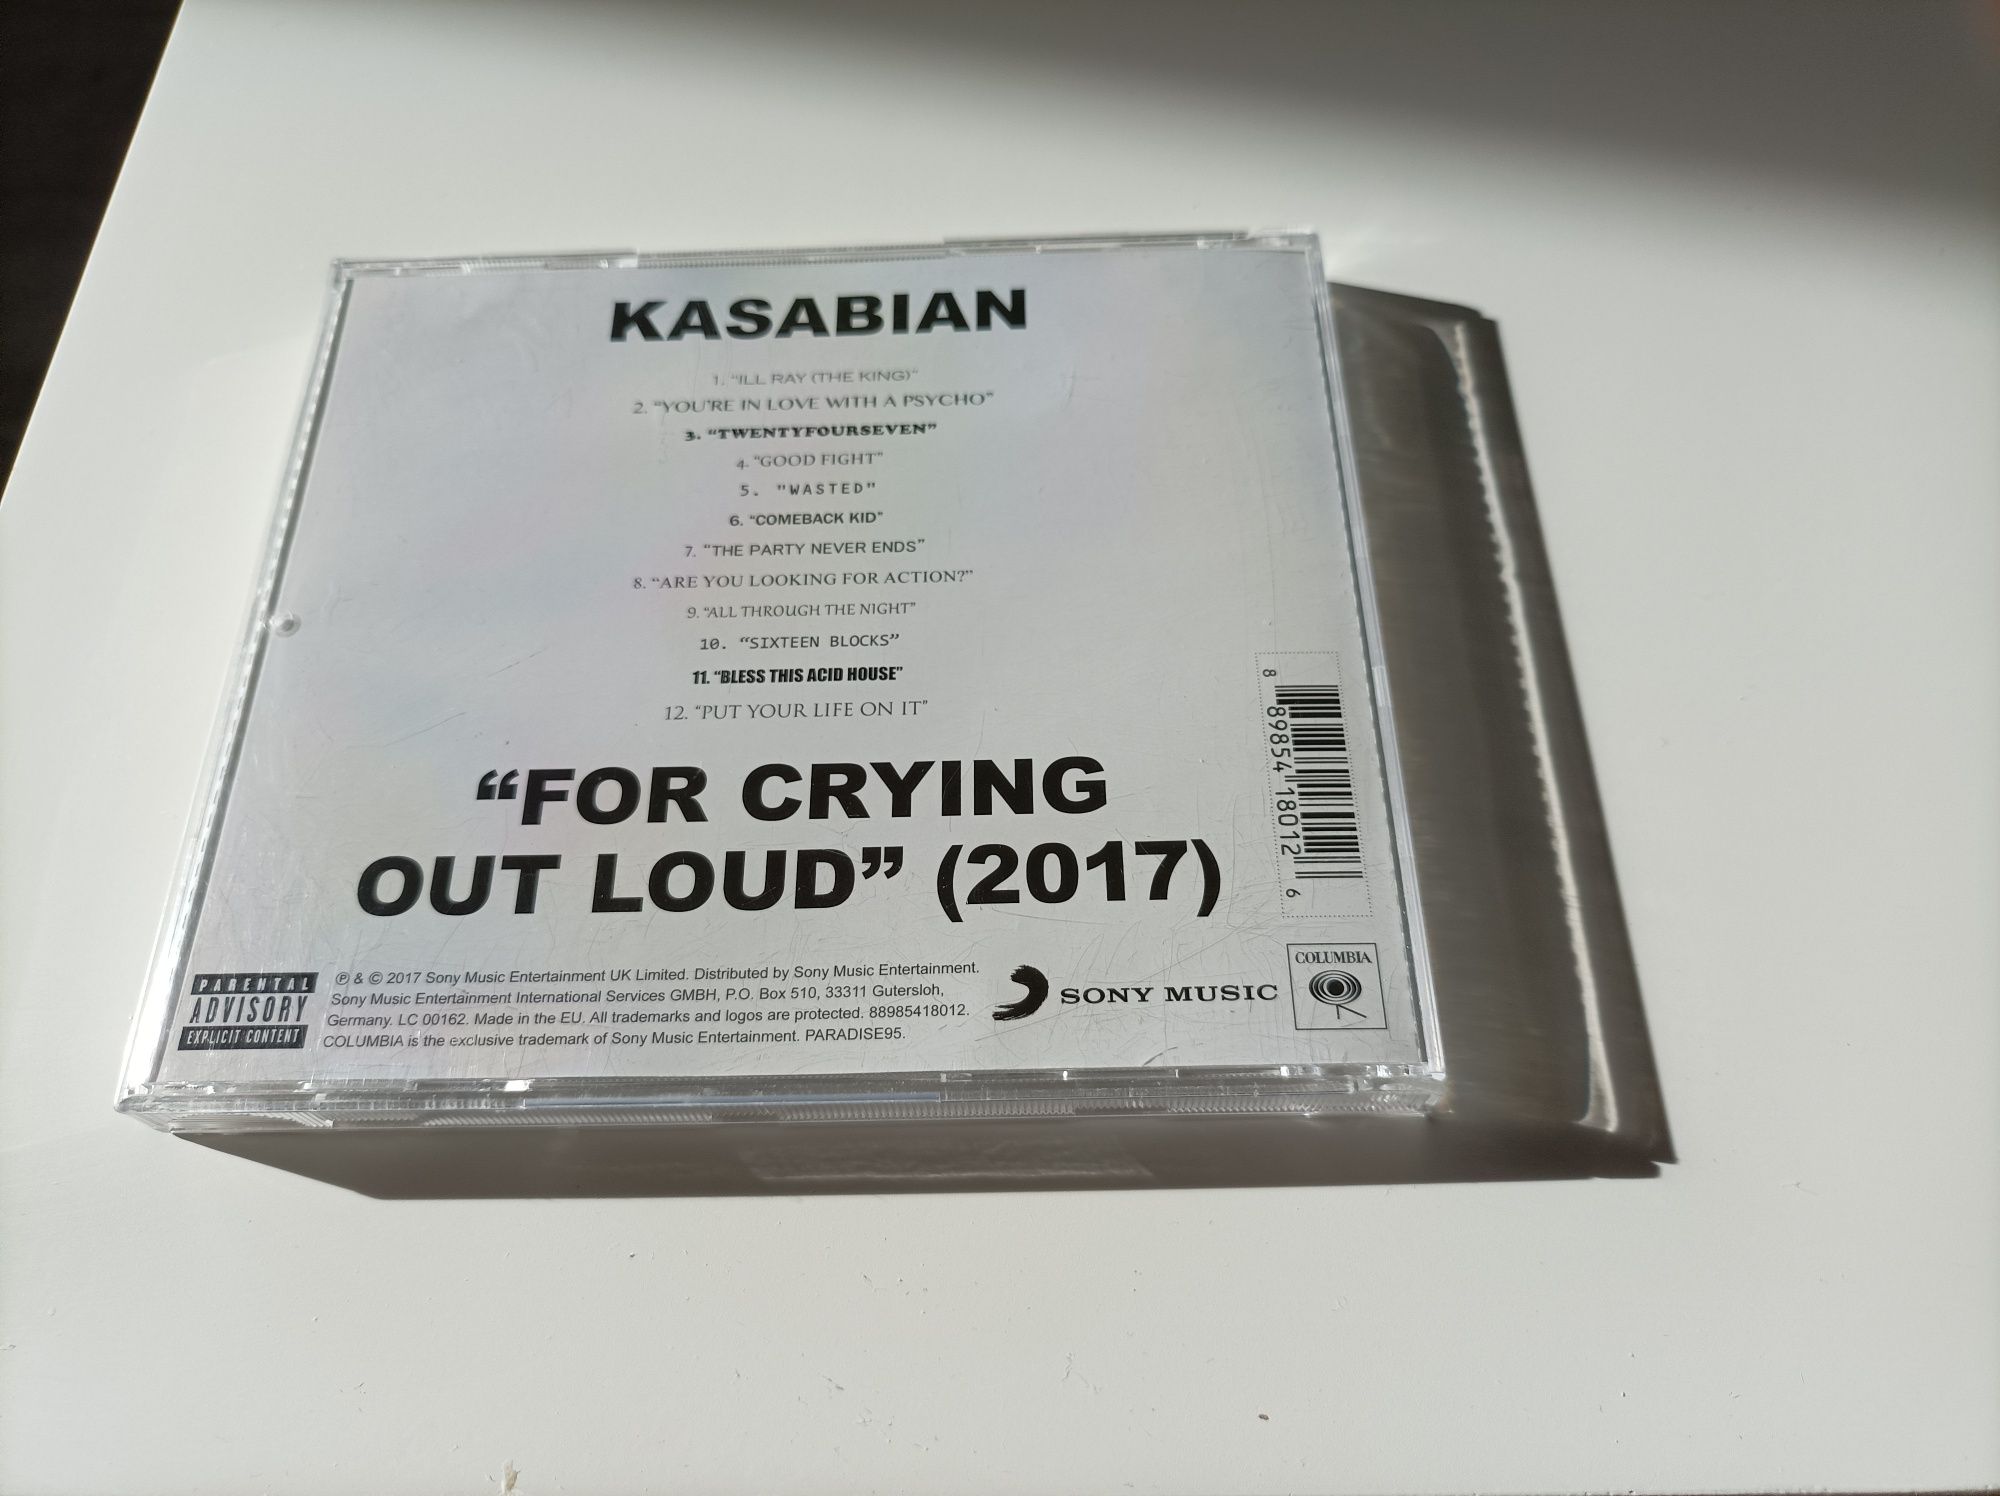 Kasabian - "For crying out loud" CD